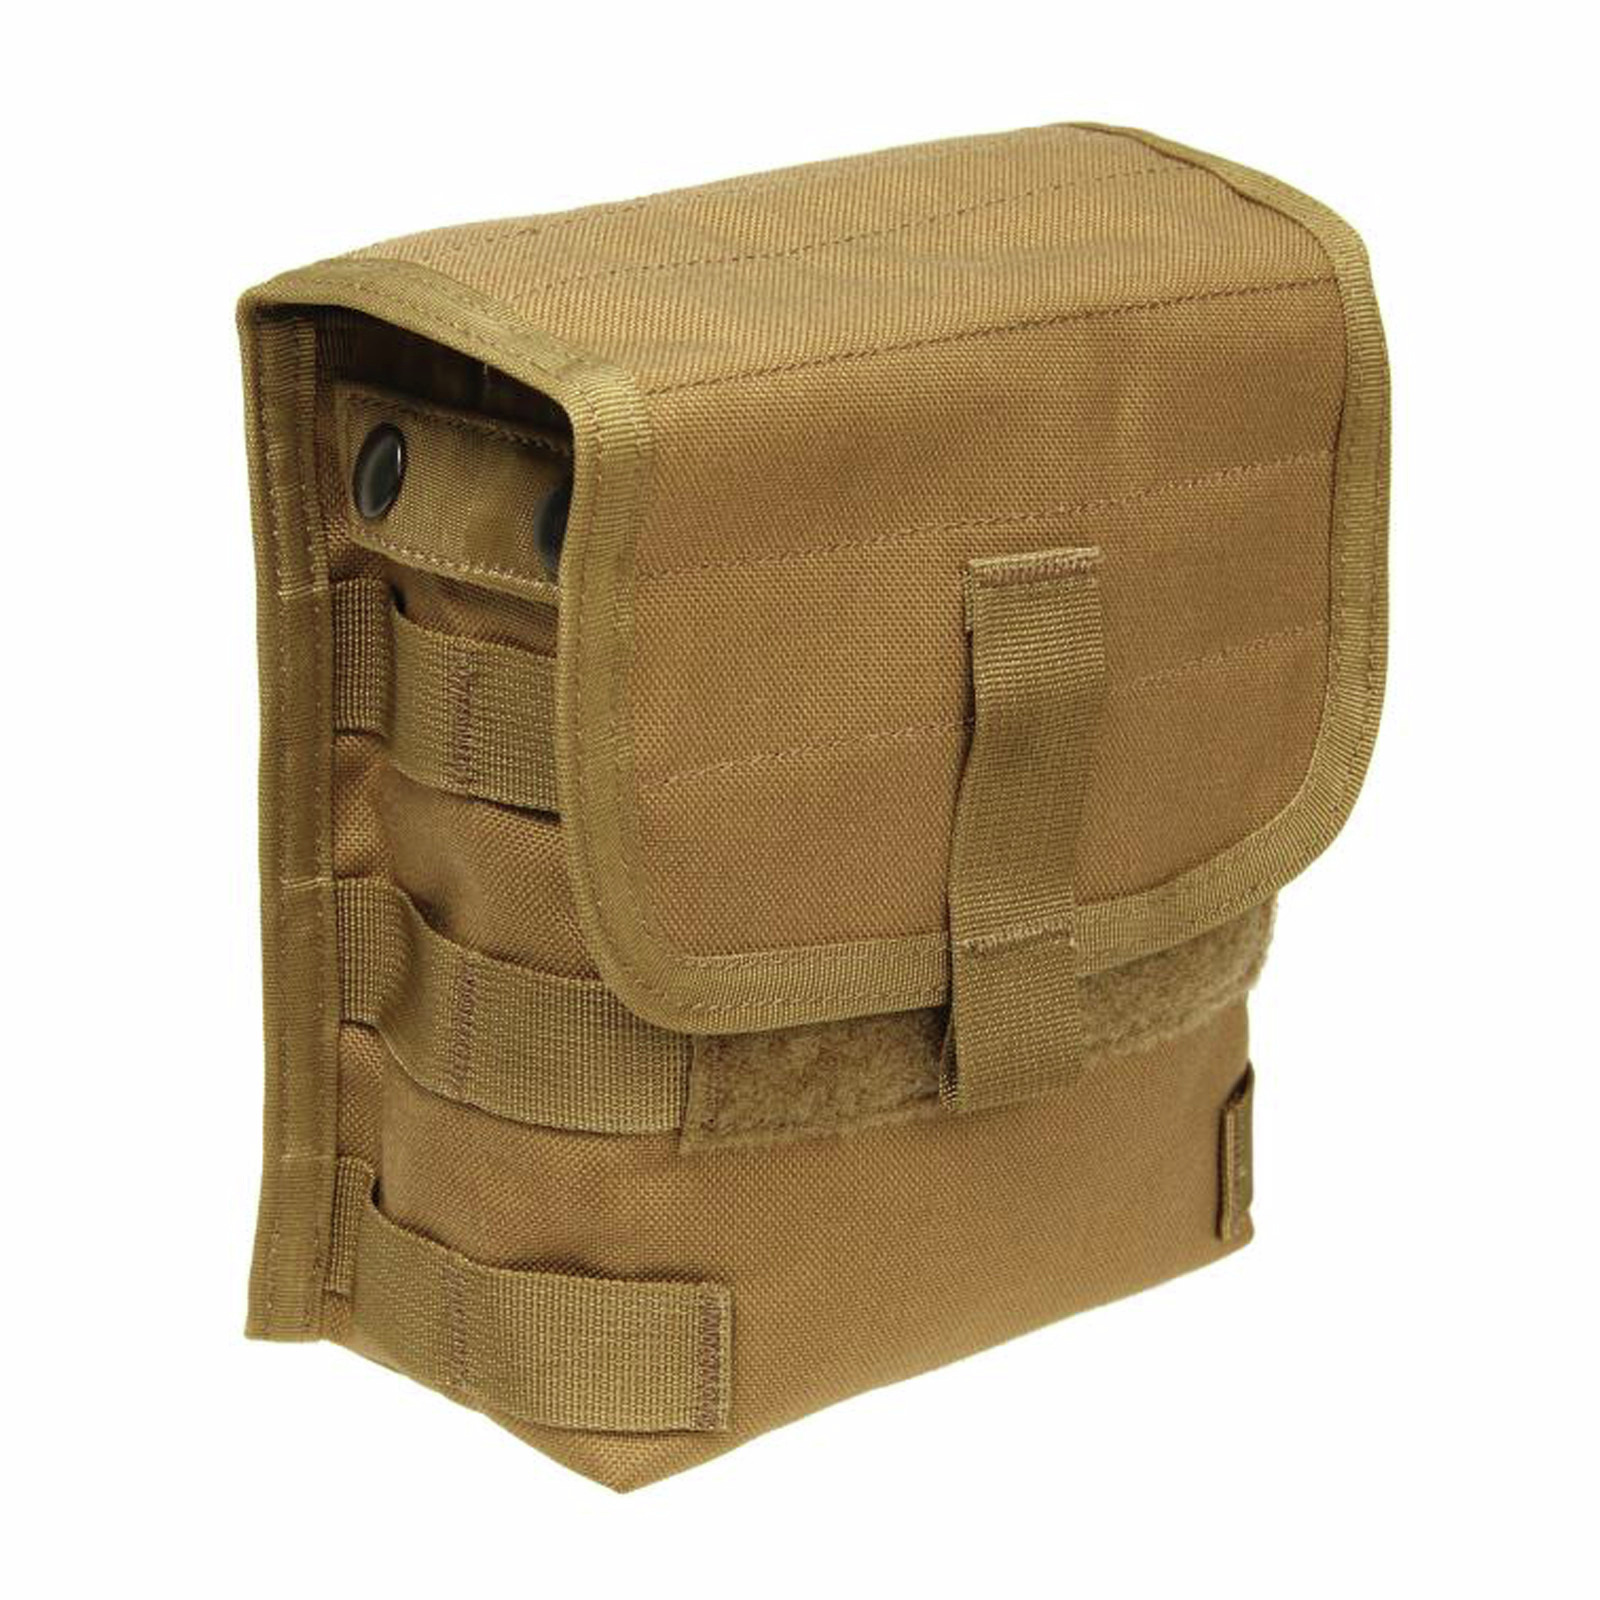 S.T.R.I.K.E.® M249 (Saw) Ammo Pouch - MOLLE